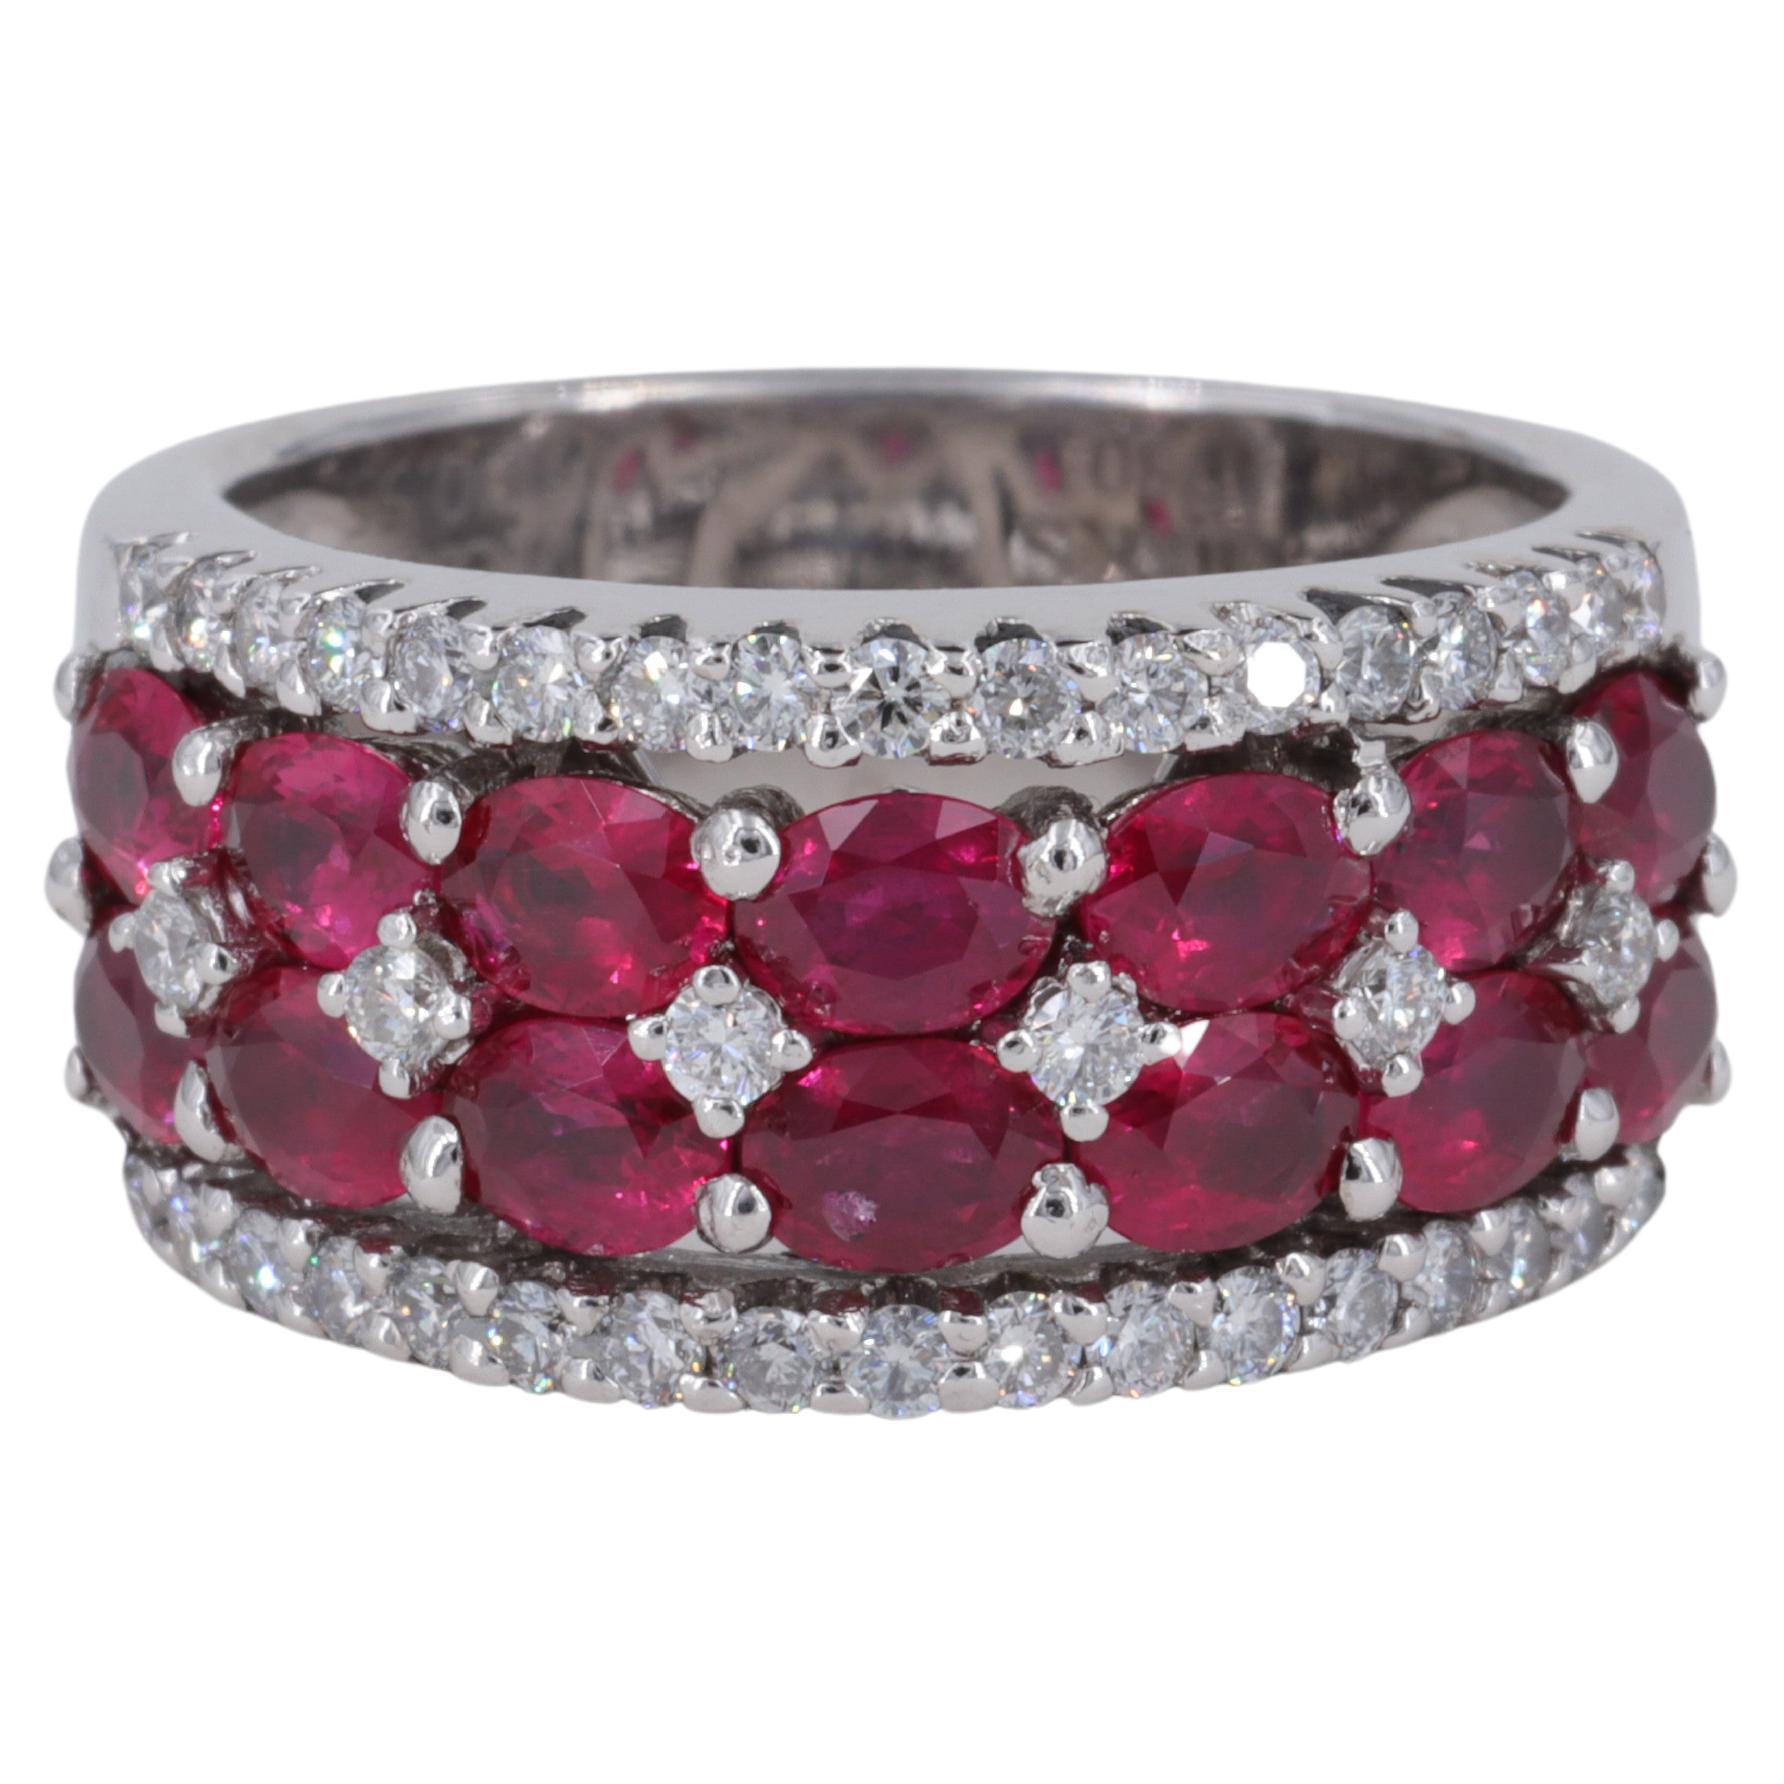 Birks Oval Shaped Natural Ruby and Diamond Wide Band Ring in 18 Karat White Gold